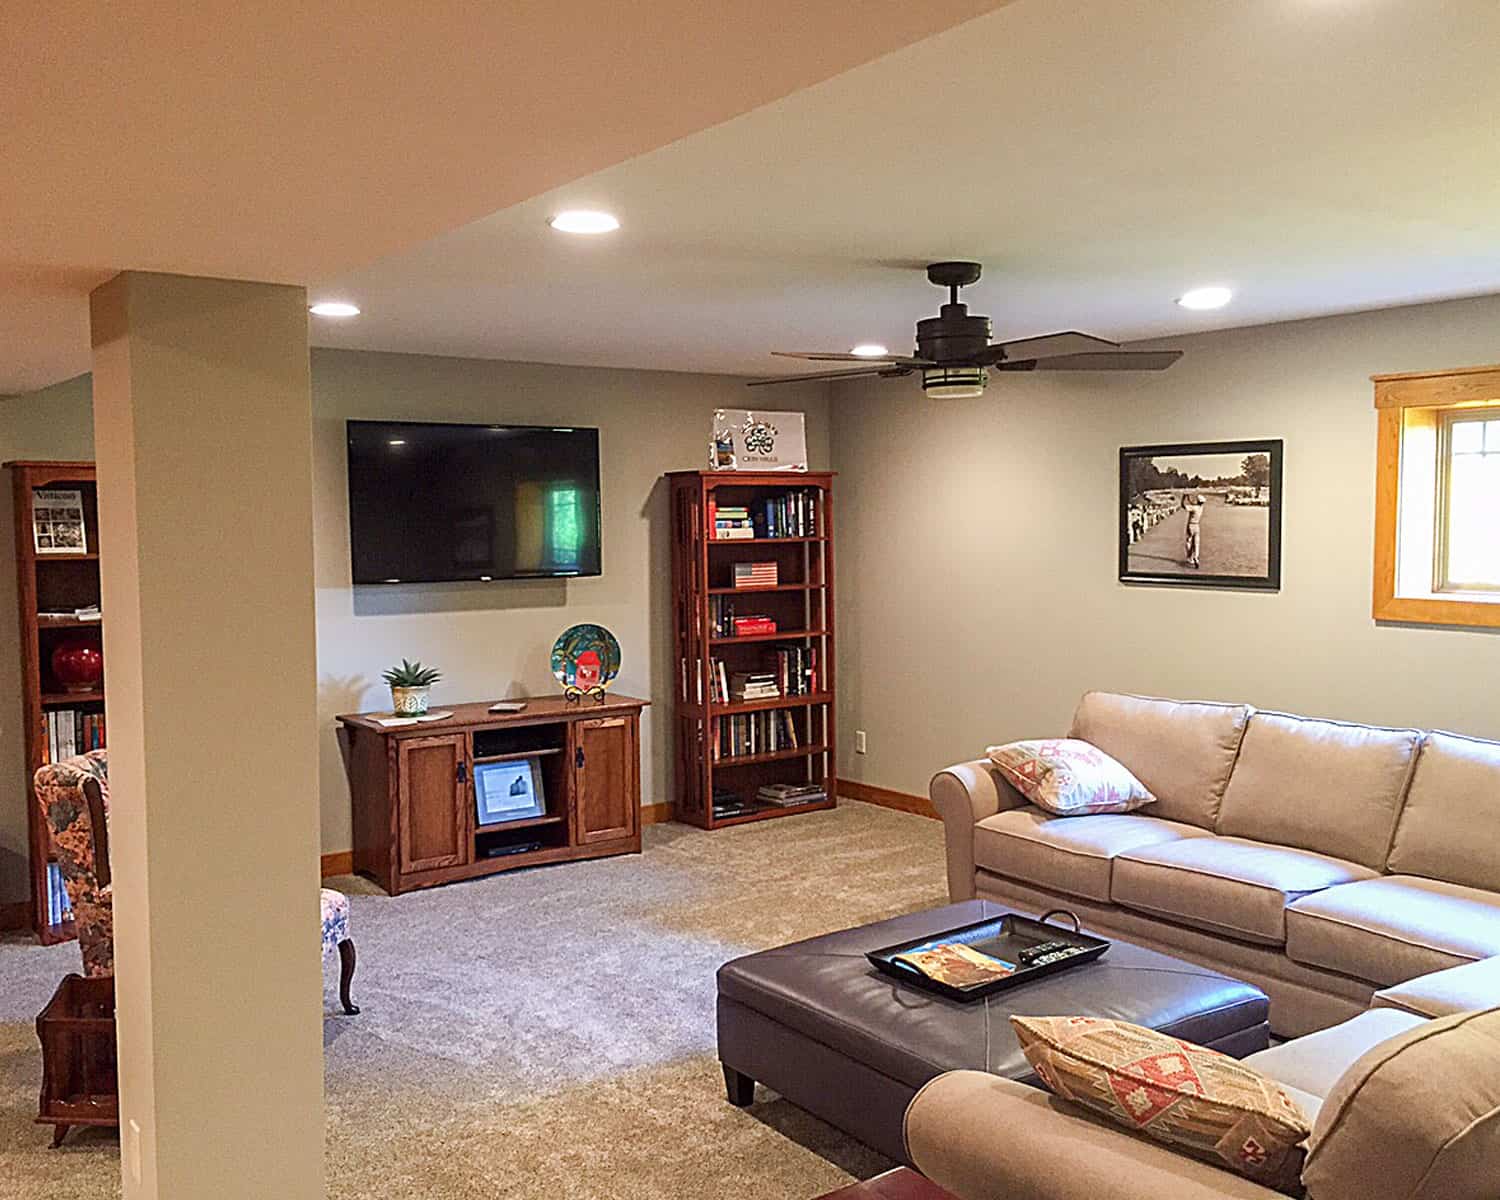 Lemel Homes Remodeling - Basement - Livingroom area with shelves and television